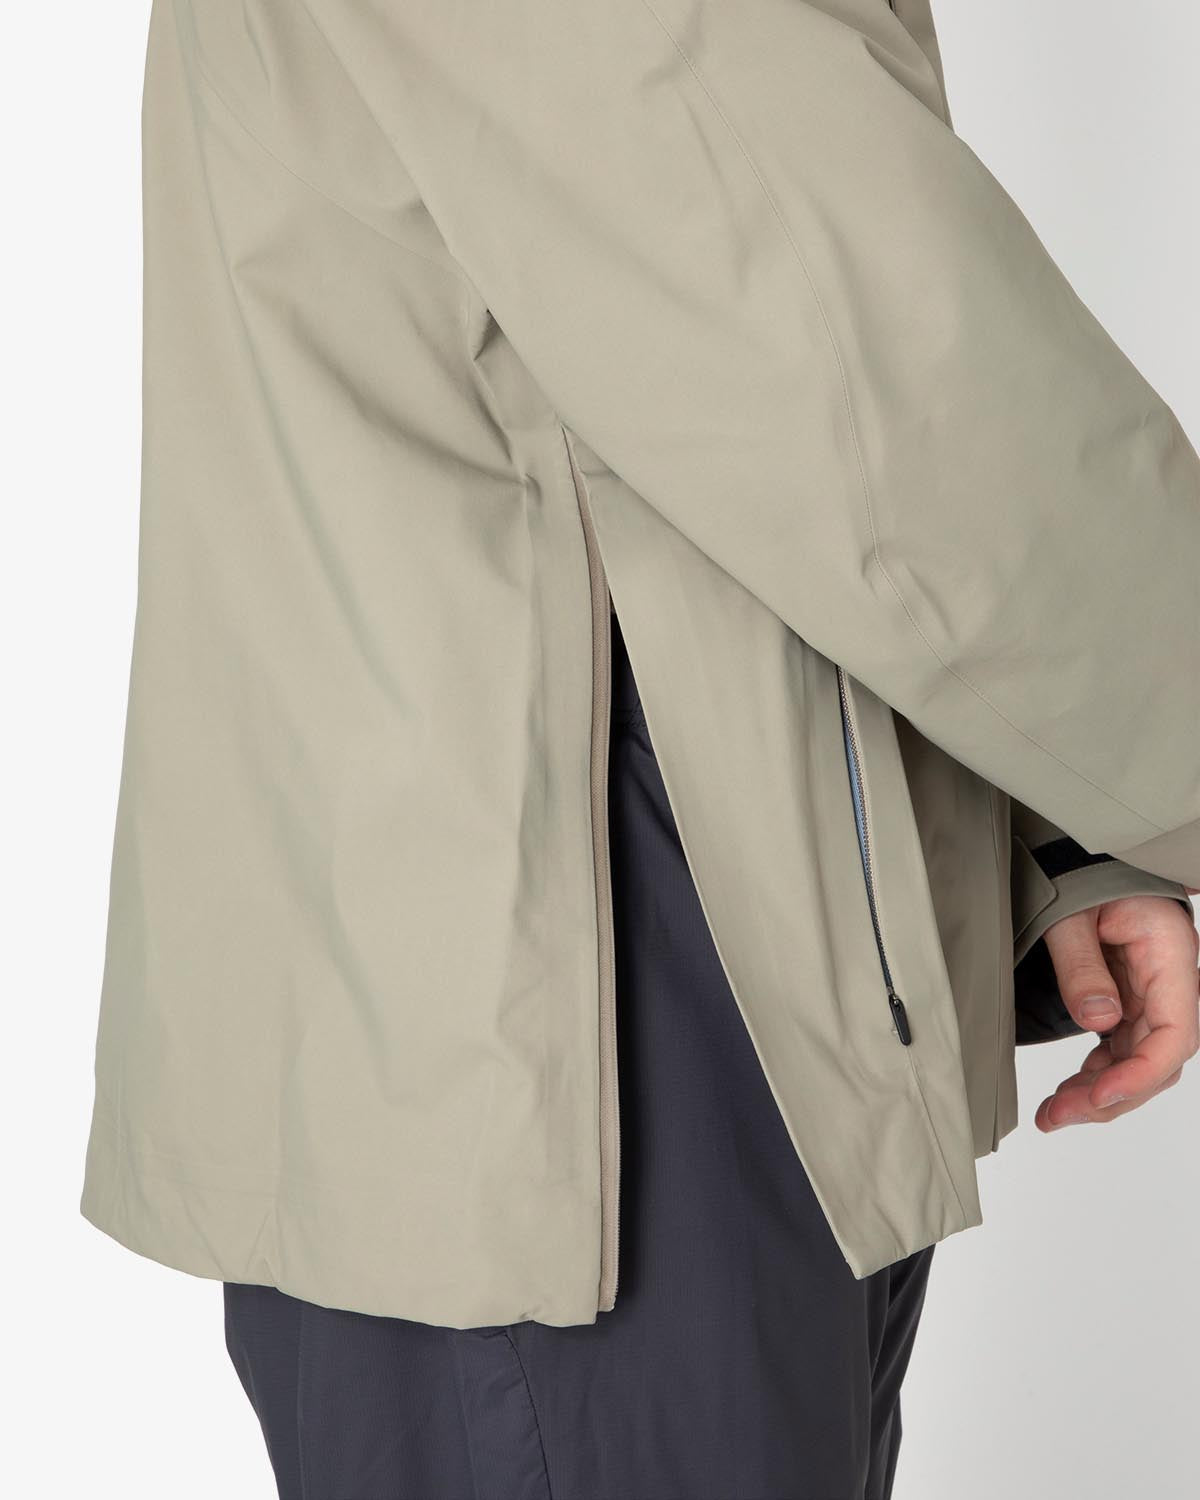 GORE-TEX SEED SHELL JACKET